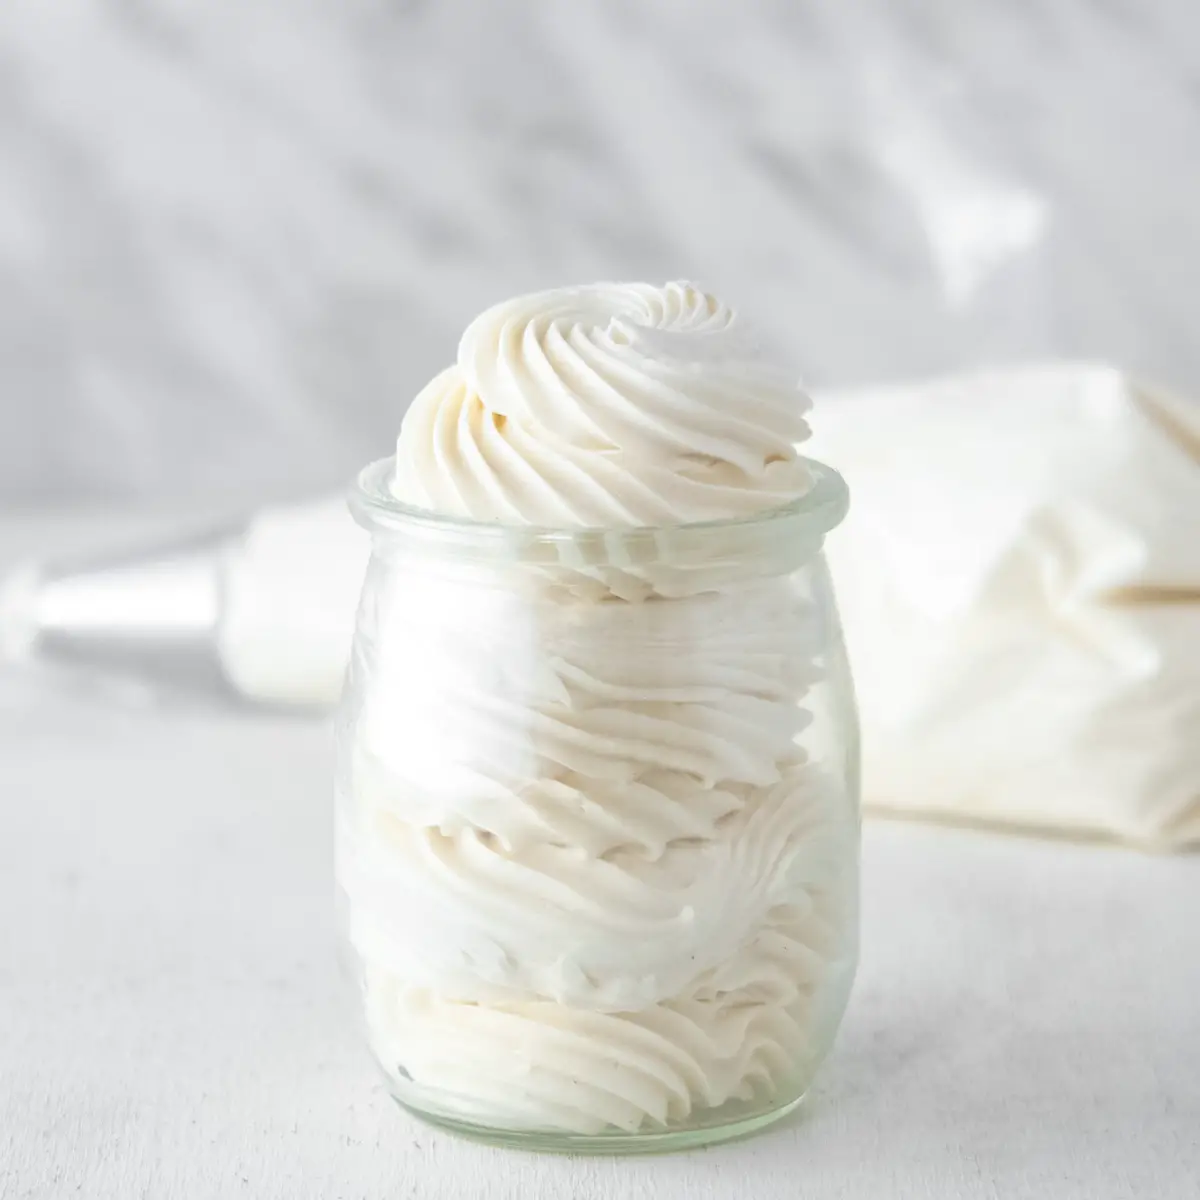 Vegan Italian meringue buttercream piped into a small glass jar with a pastry bag full of frosting in the background